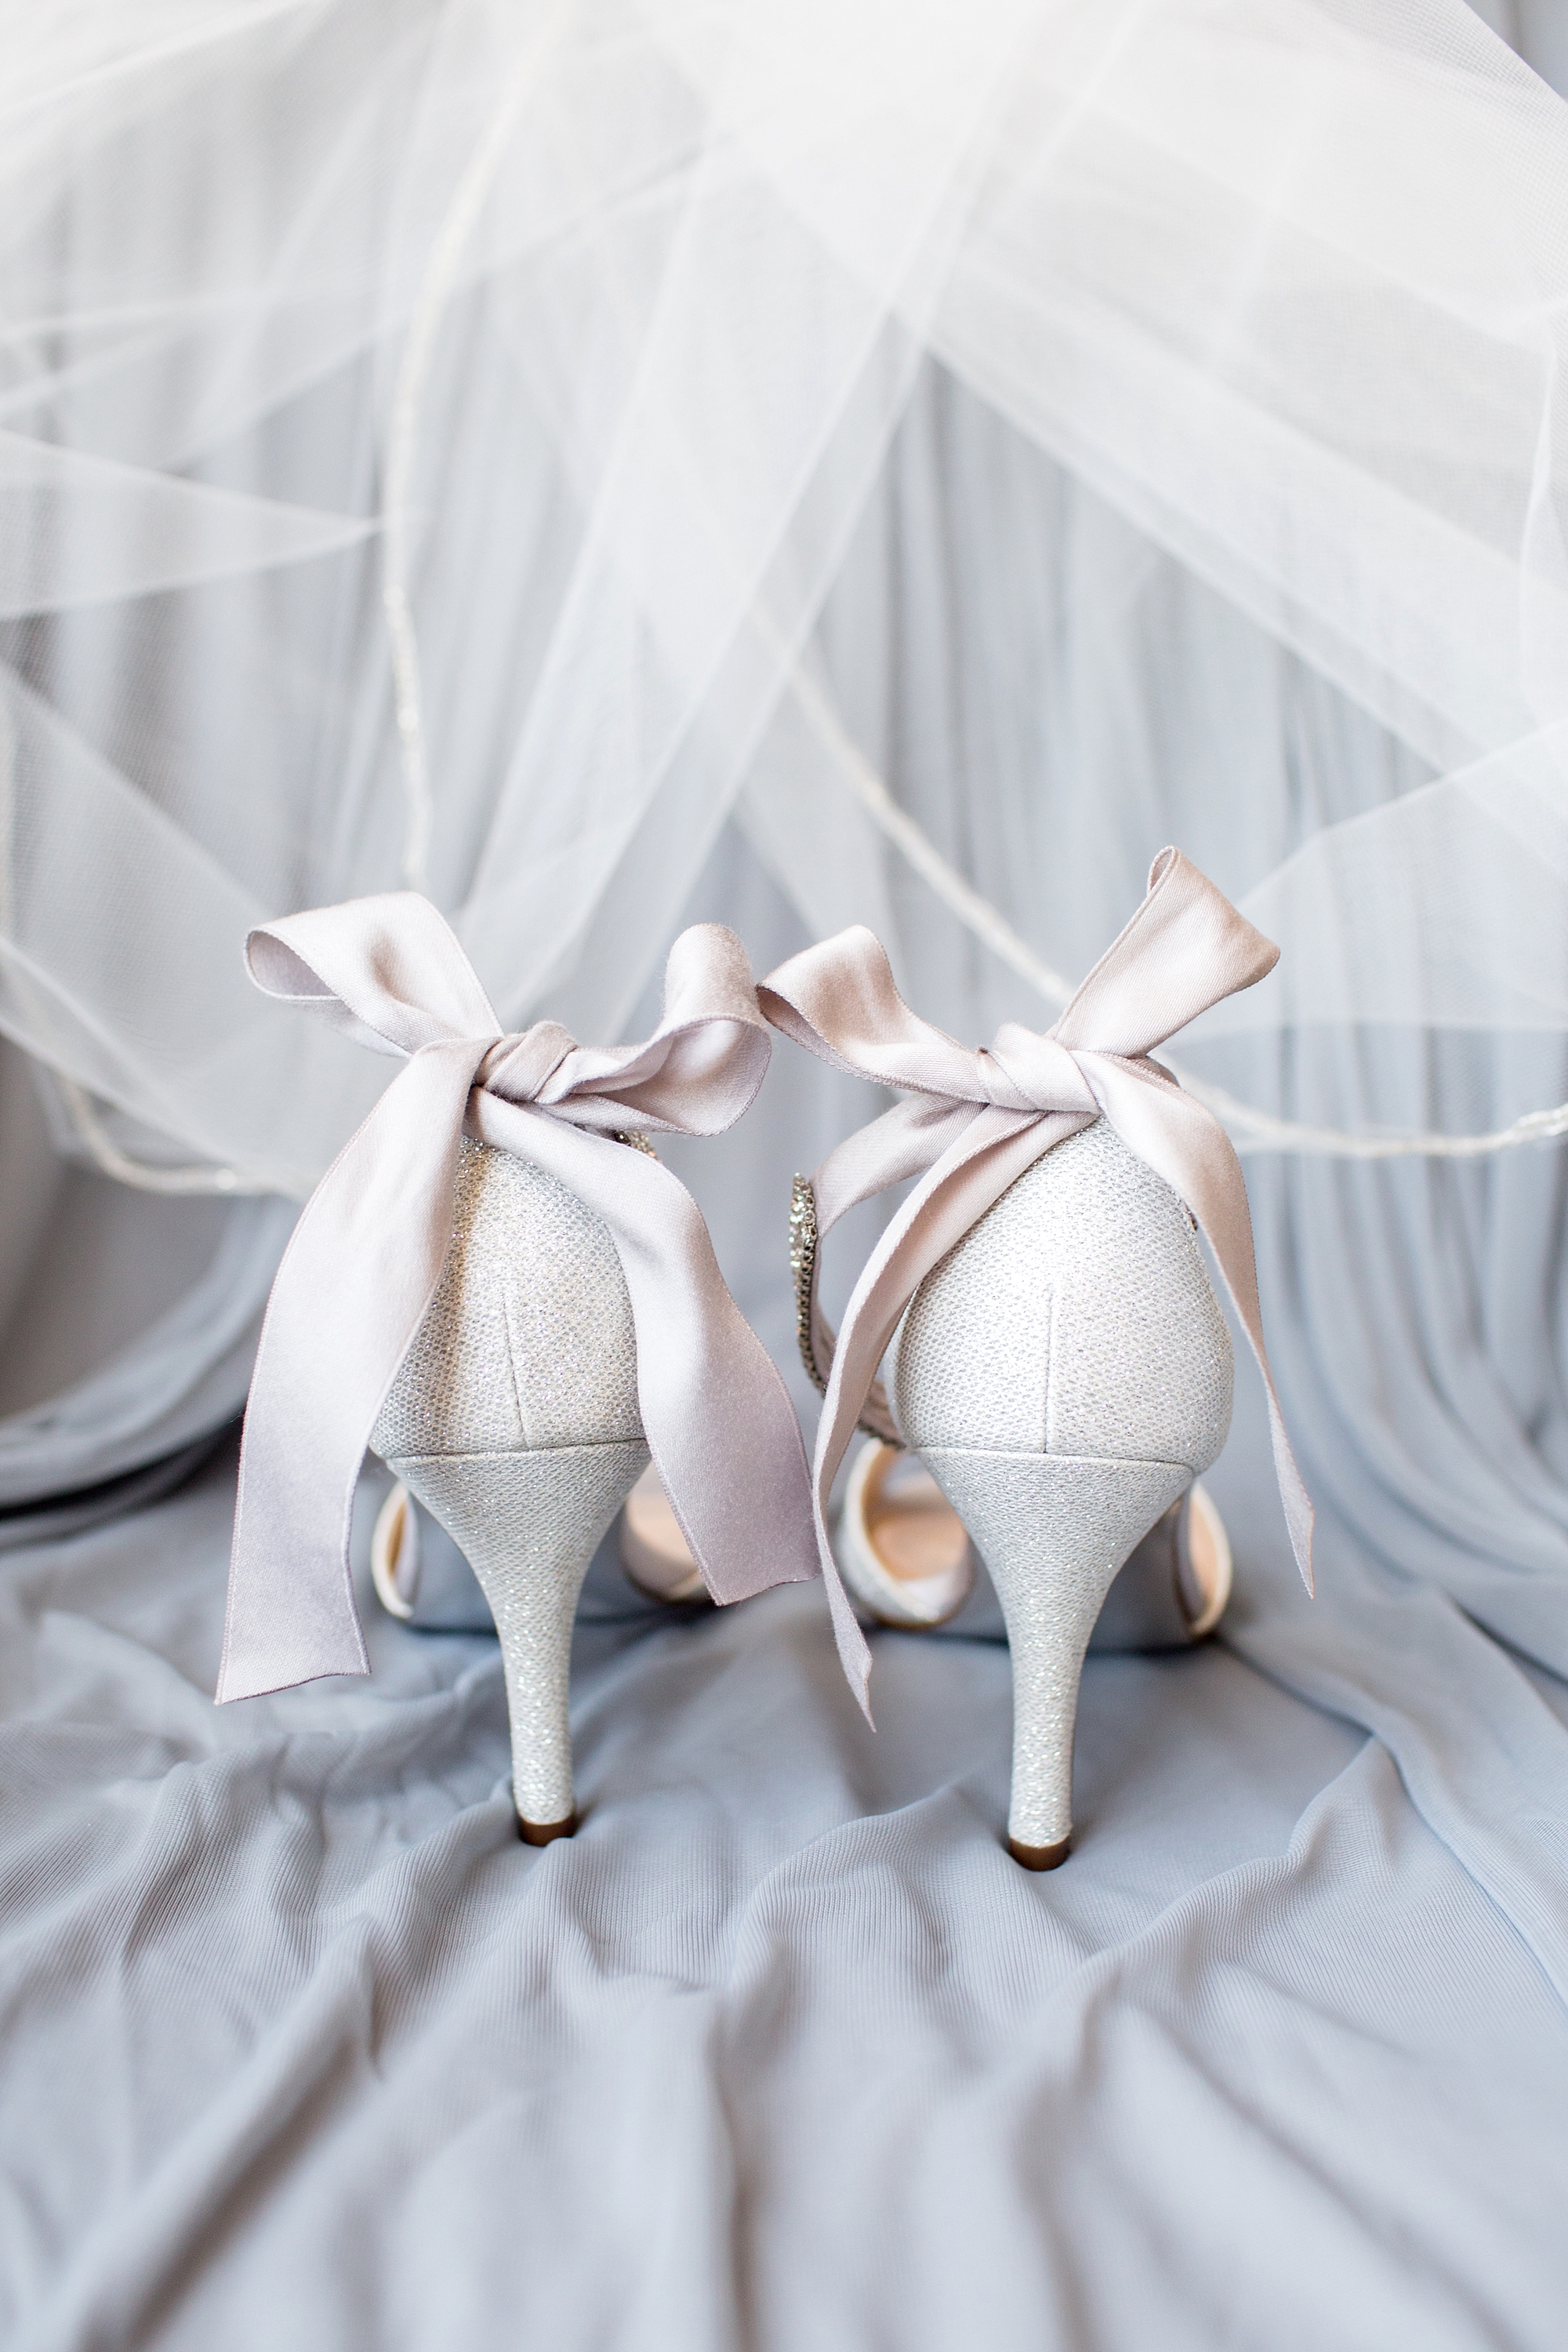  These shoes are incredible!! So romantic! 